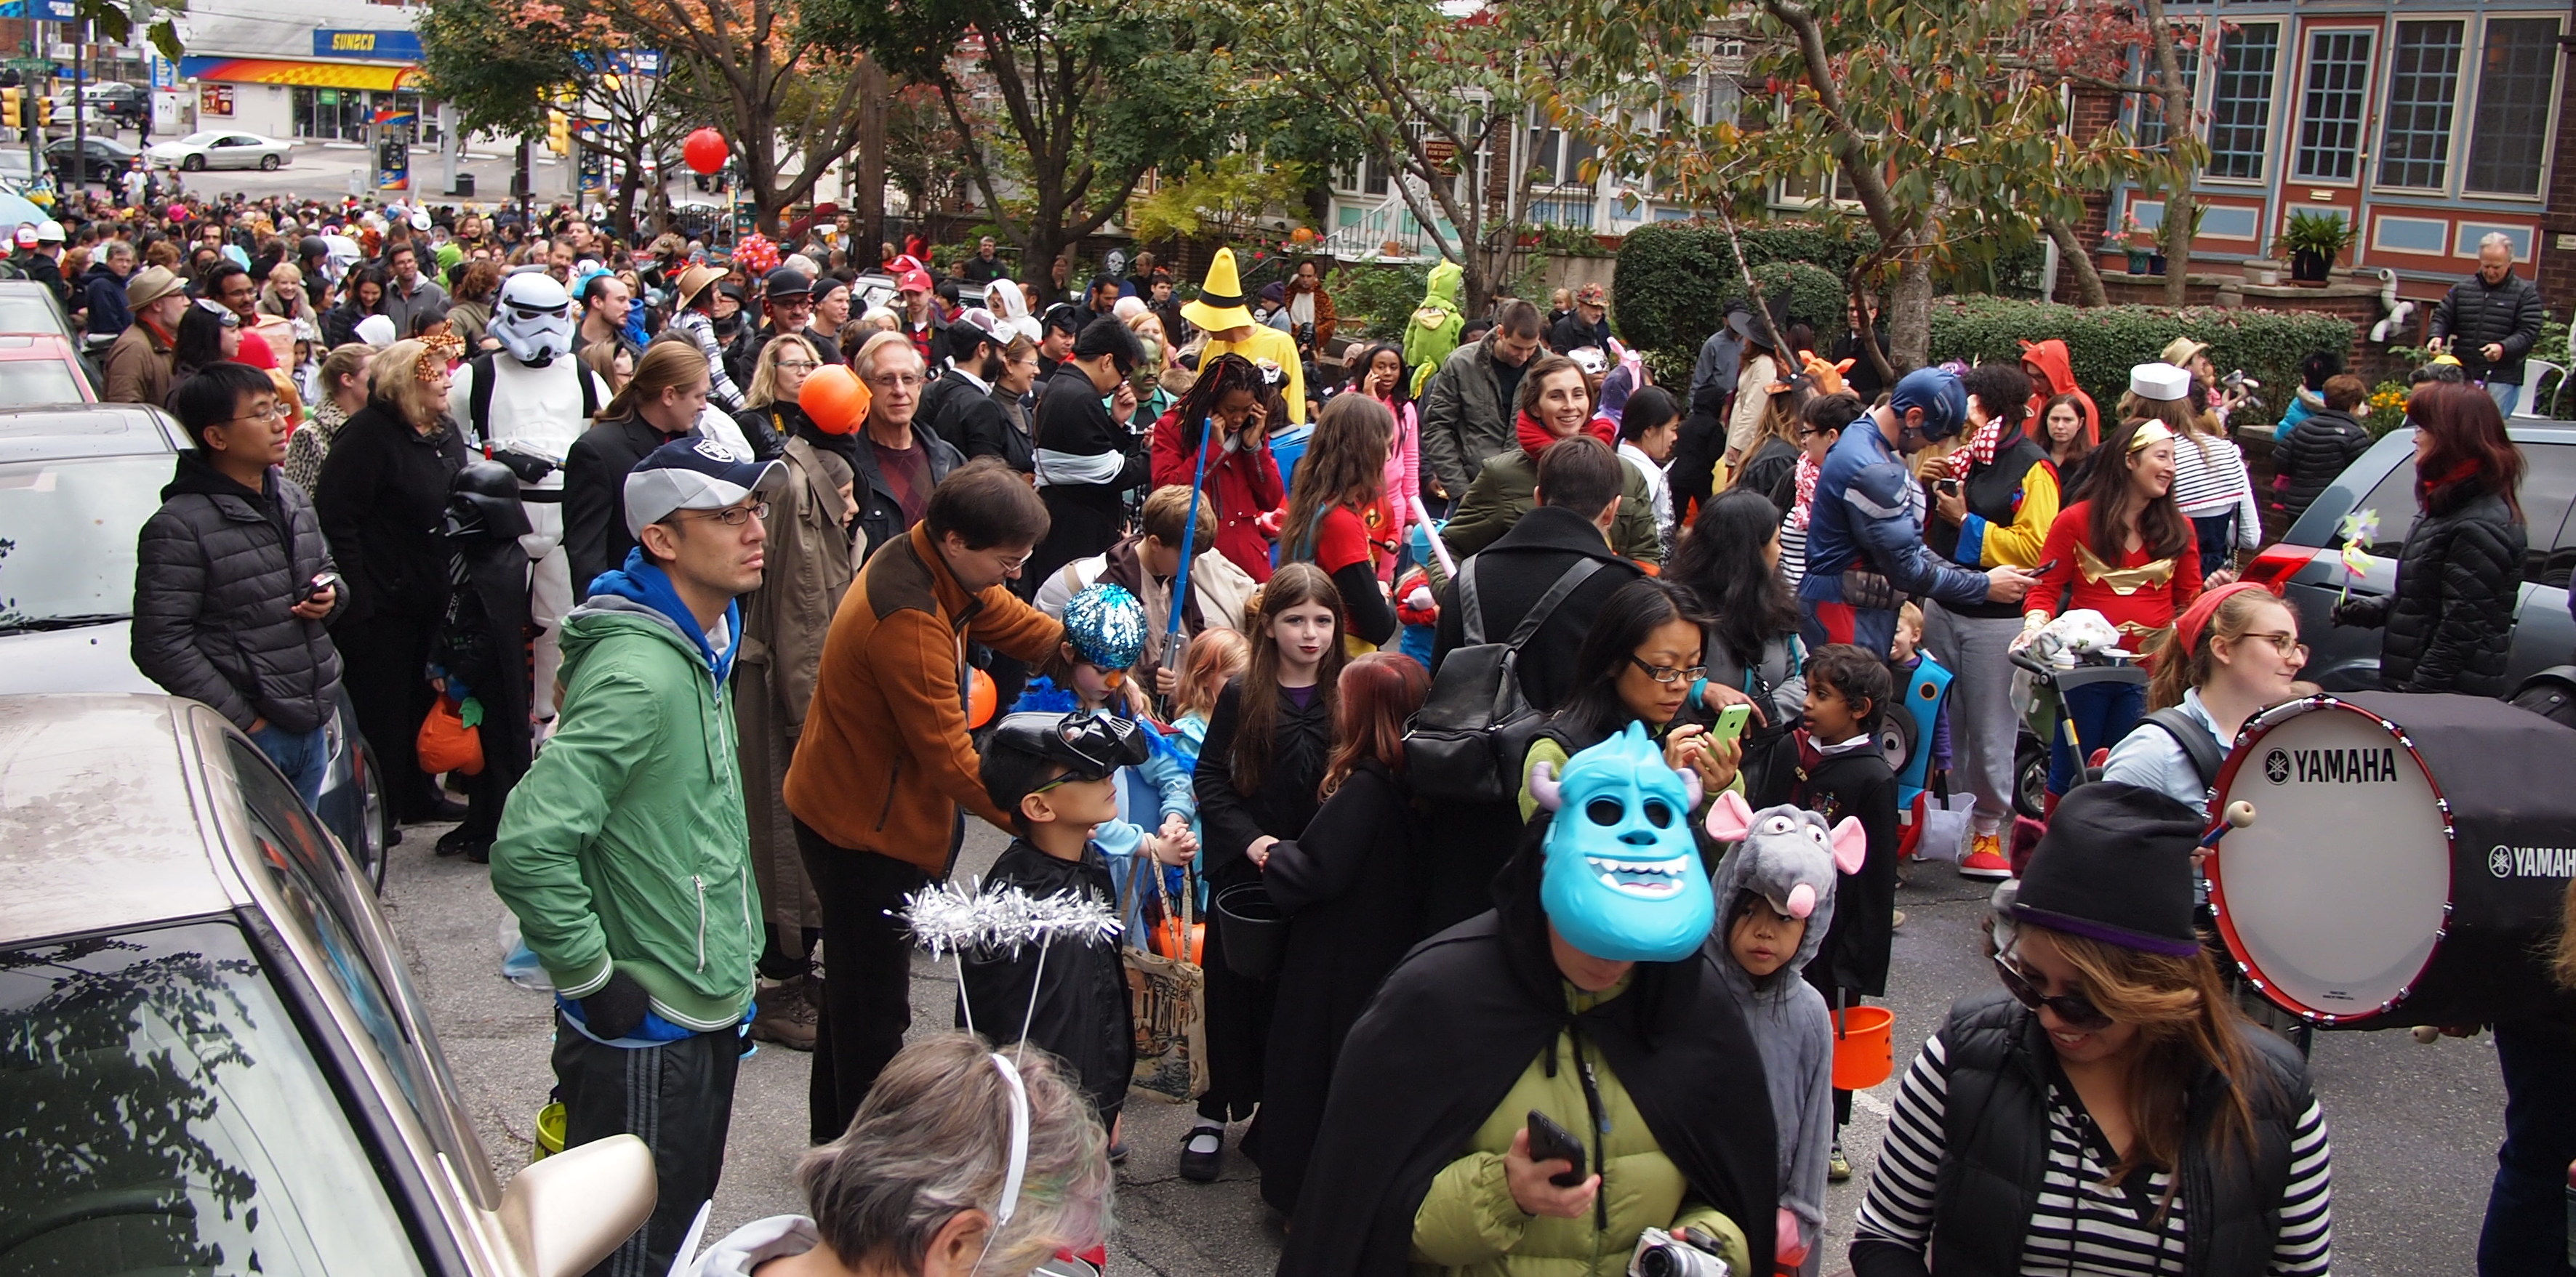 Halloween parade a smashing success in West Chester – Daily Local